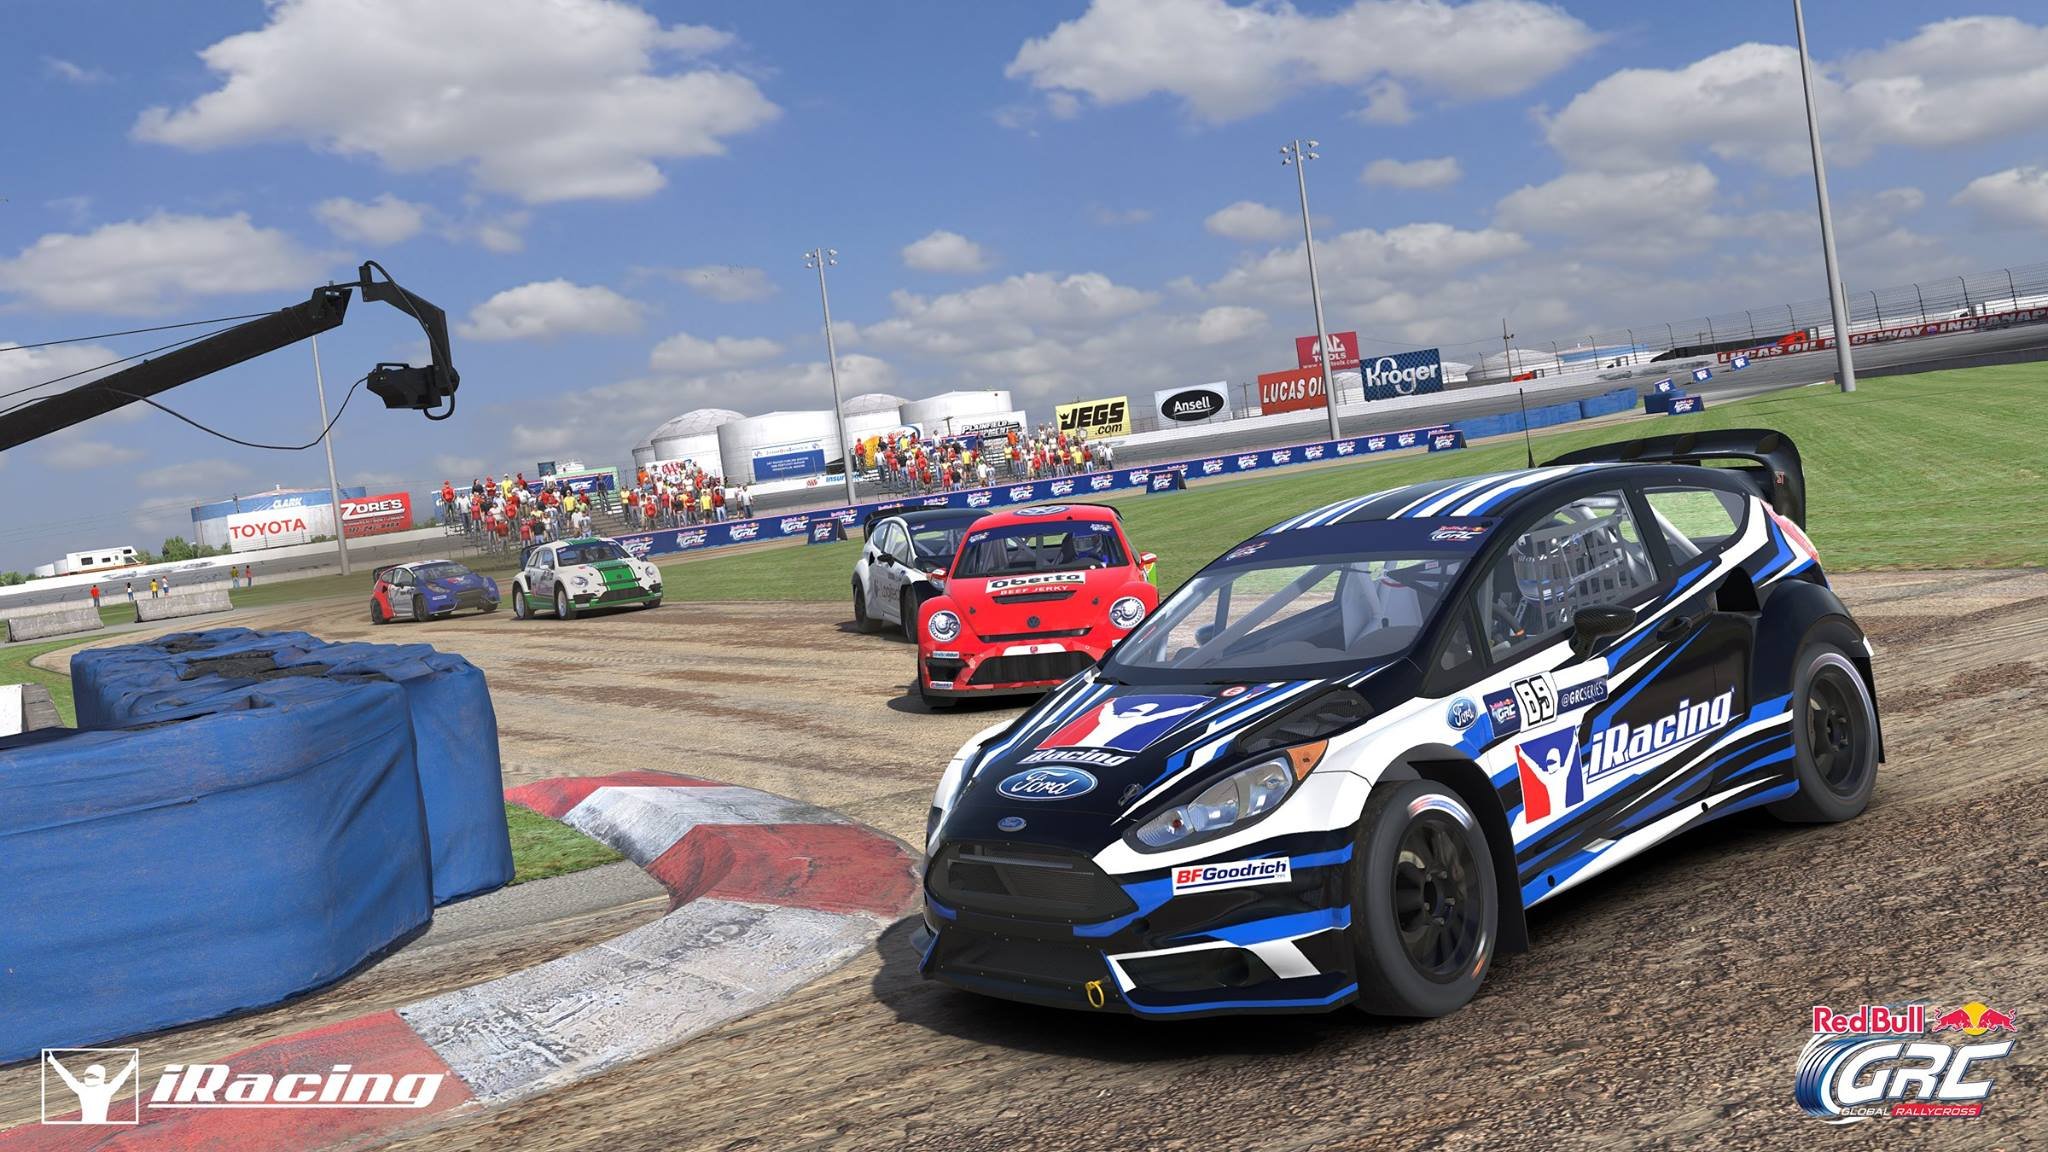 More information about "Il Red Bull Global RallyCross arriva in iRacing"